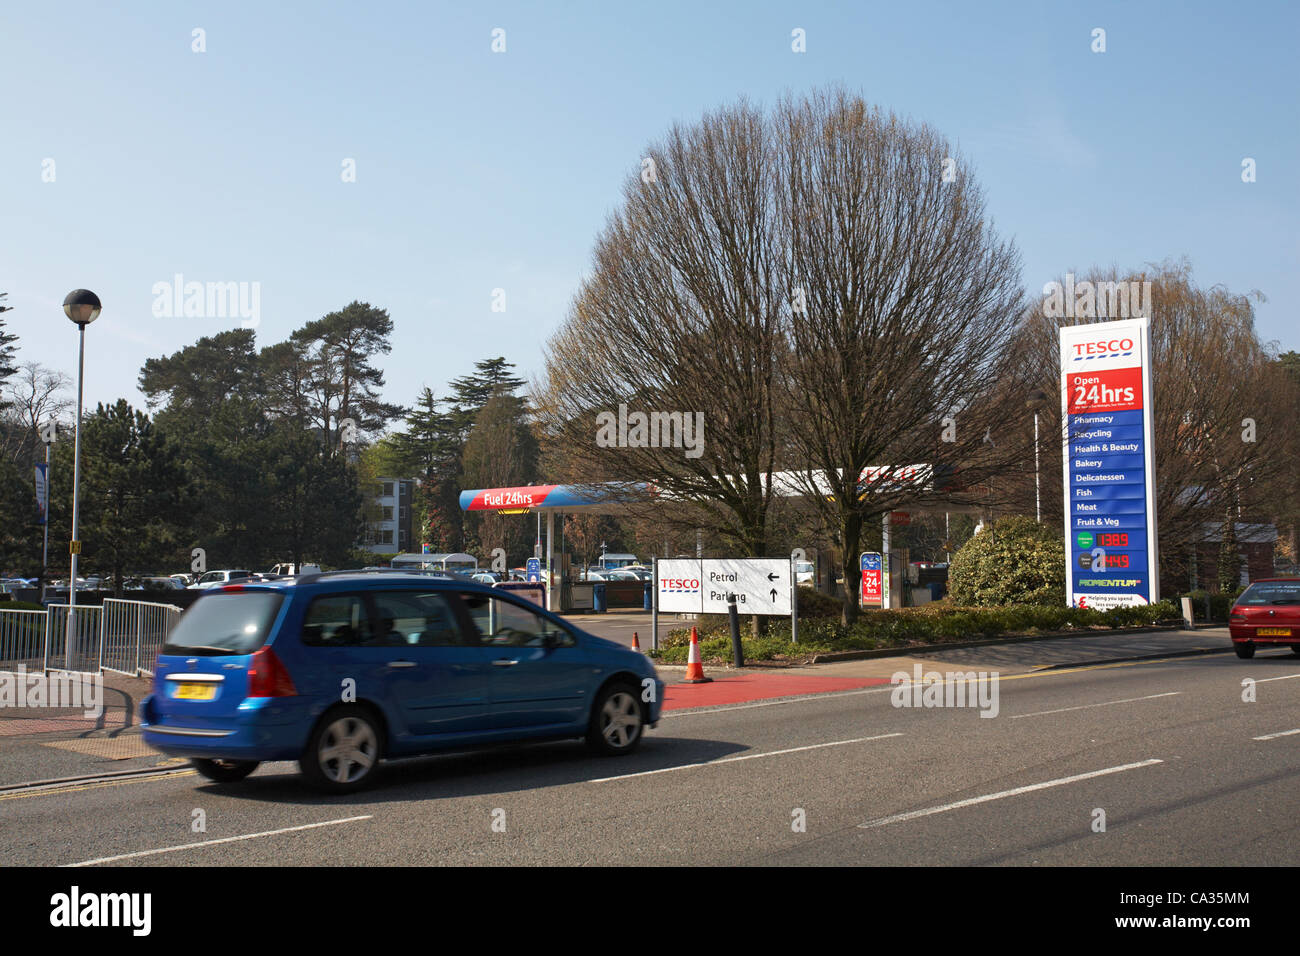 Branksome, Poole, Dorset UK Friday 30 March 2012. Tesco petrol station closed with no fuel signs following recent panic buying as people fear there may be a fuel tanker driver strike soon Stock Photo